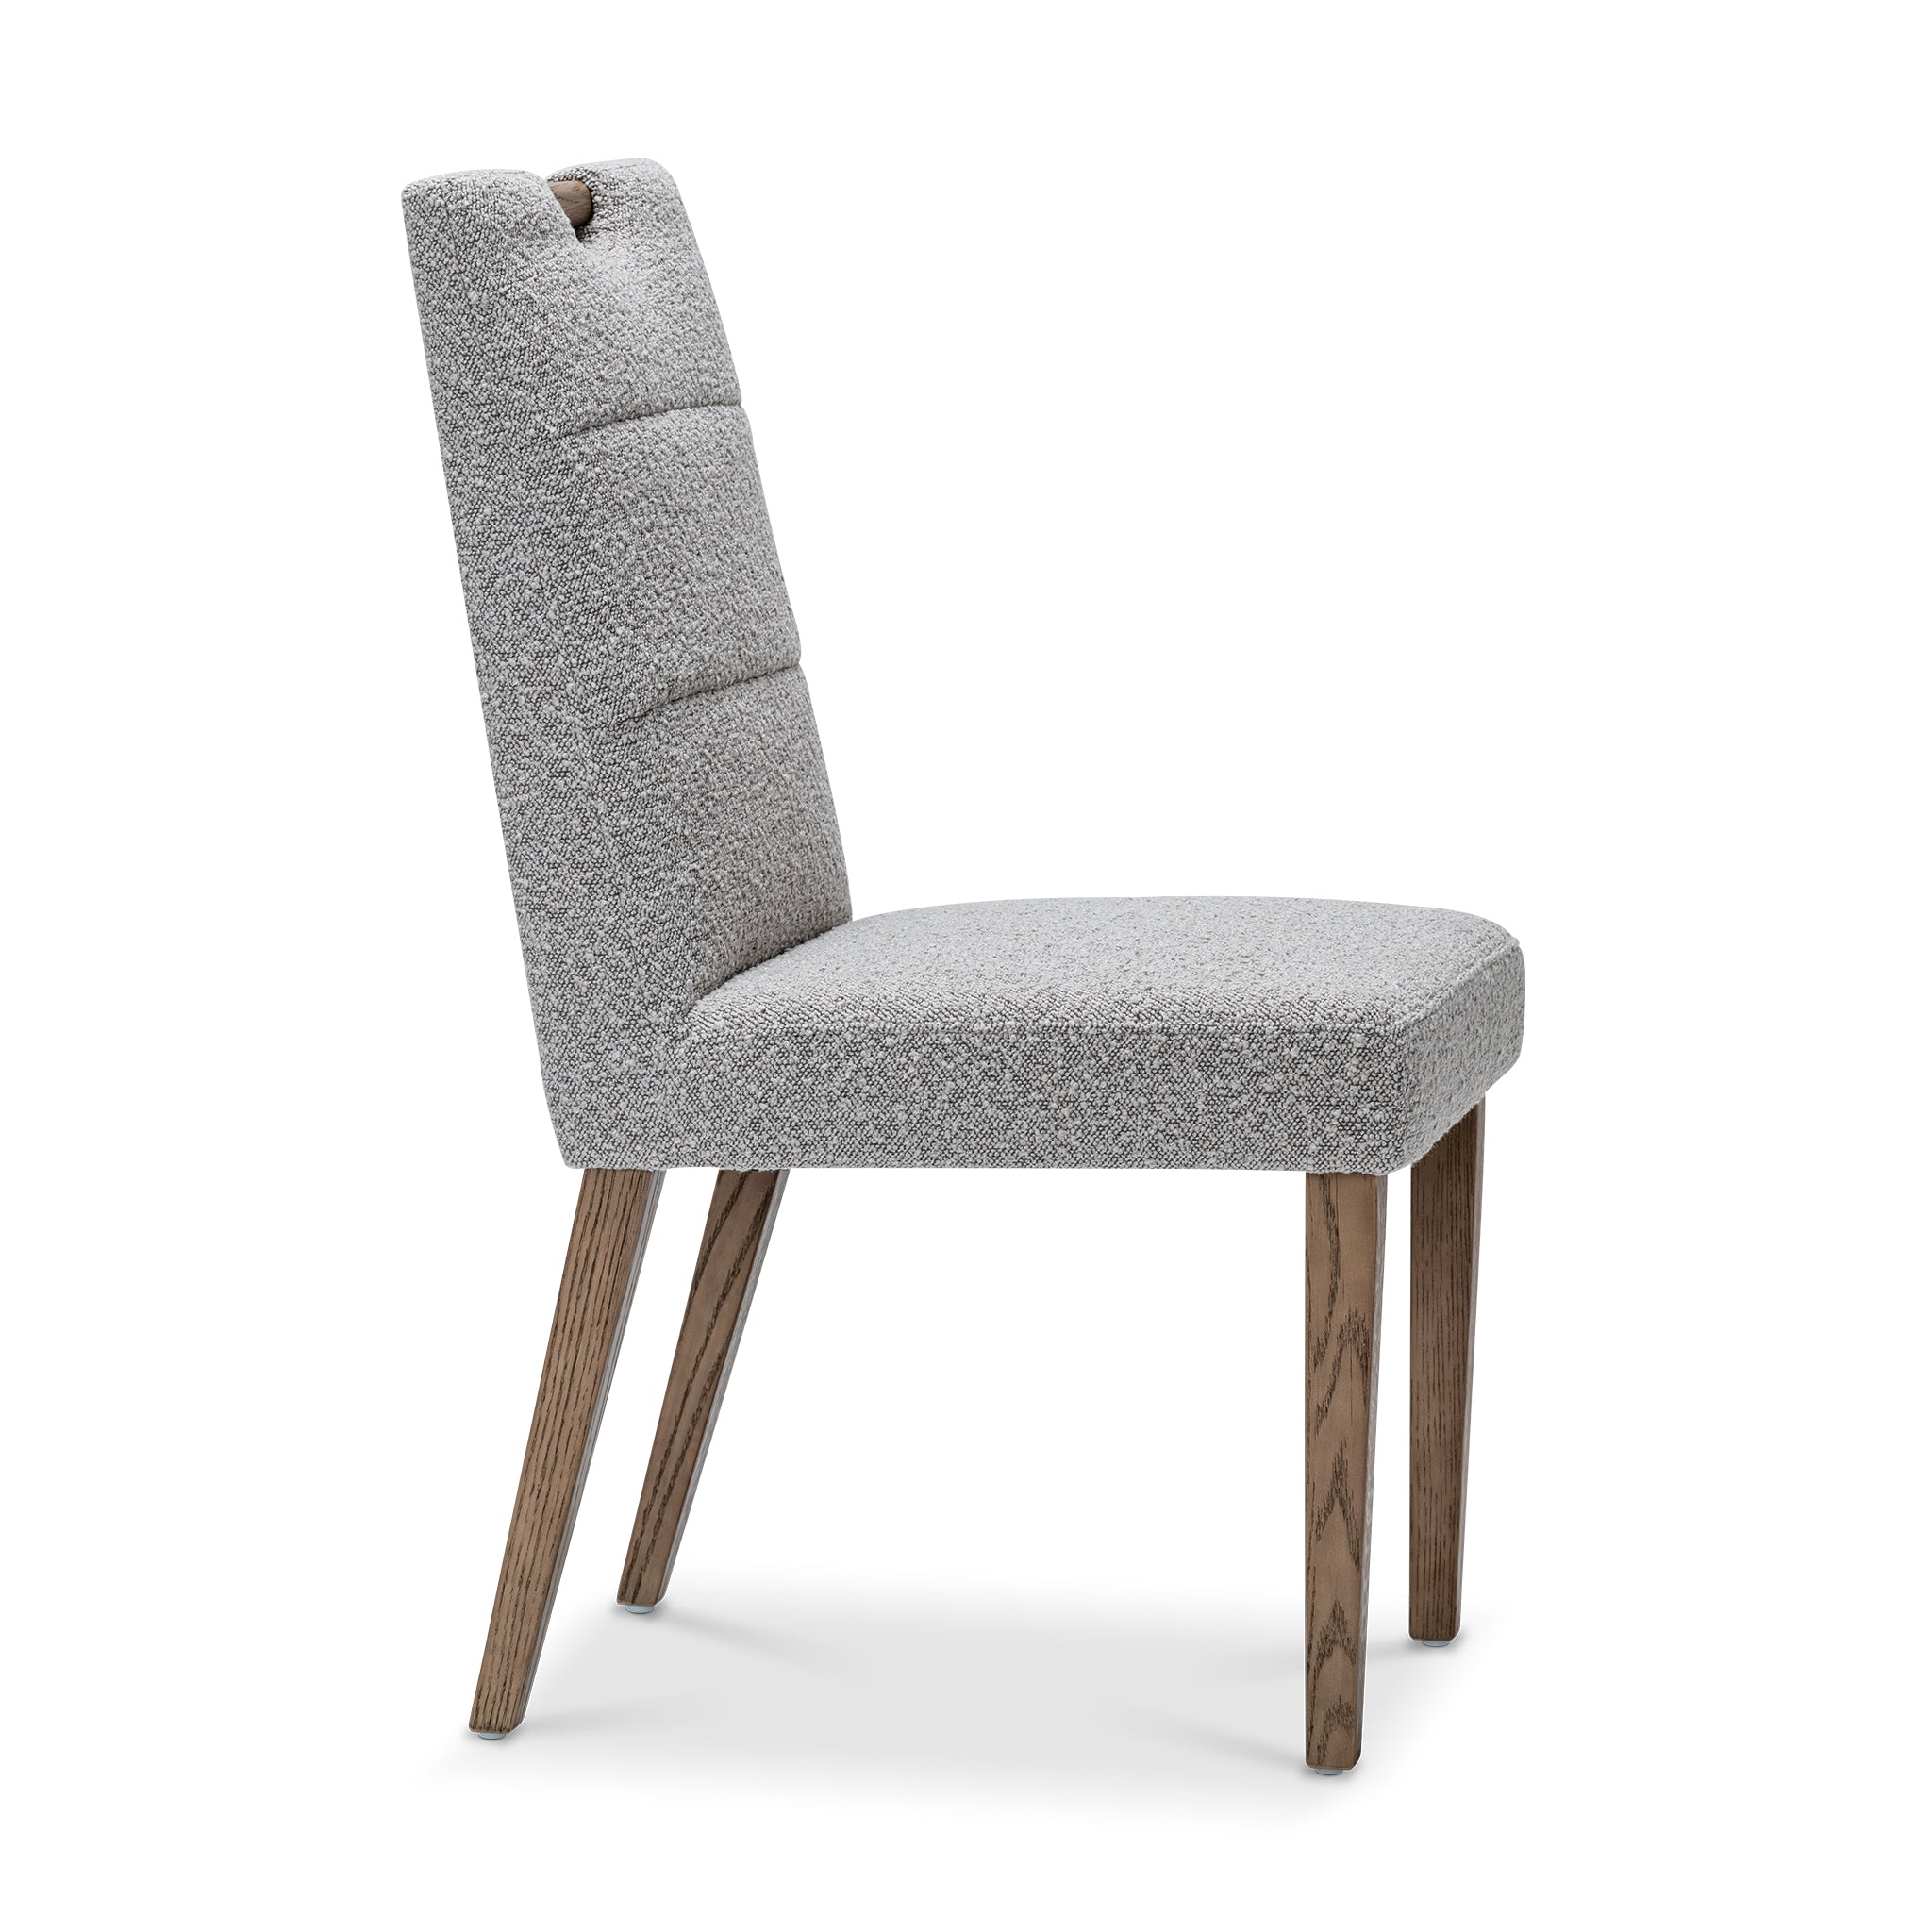 MARION DINING CHAIR